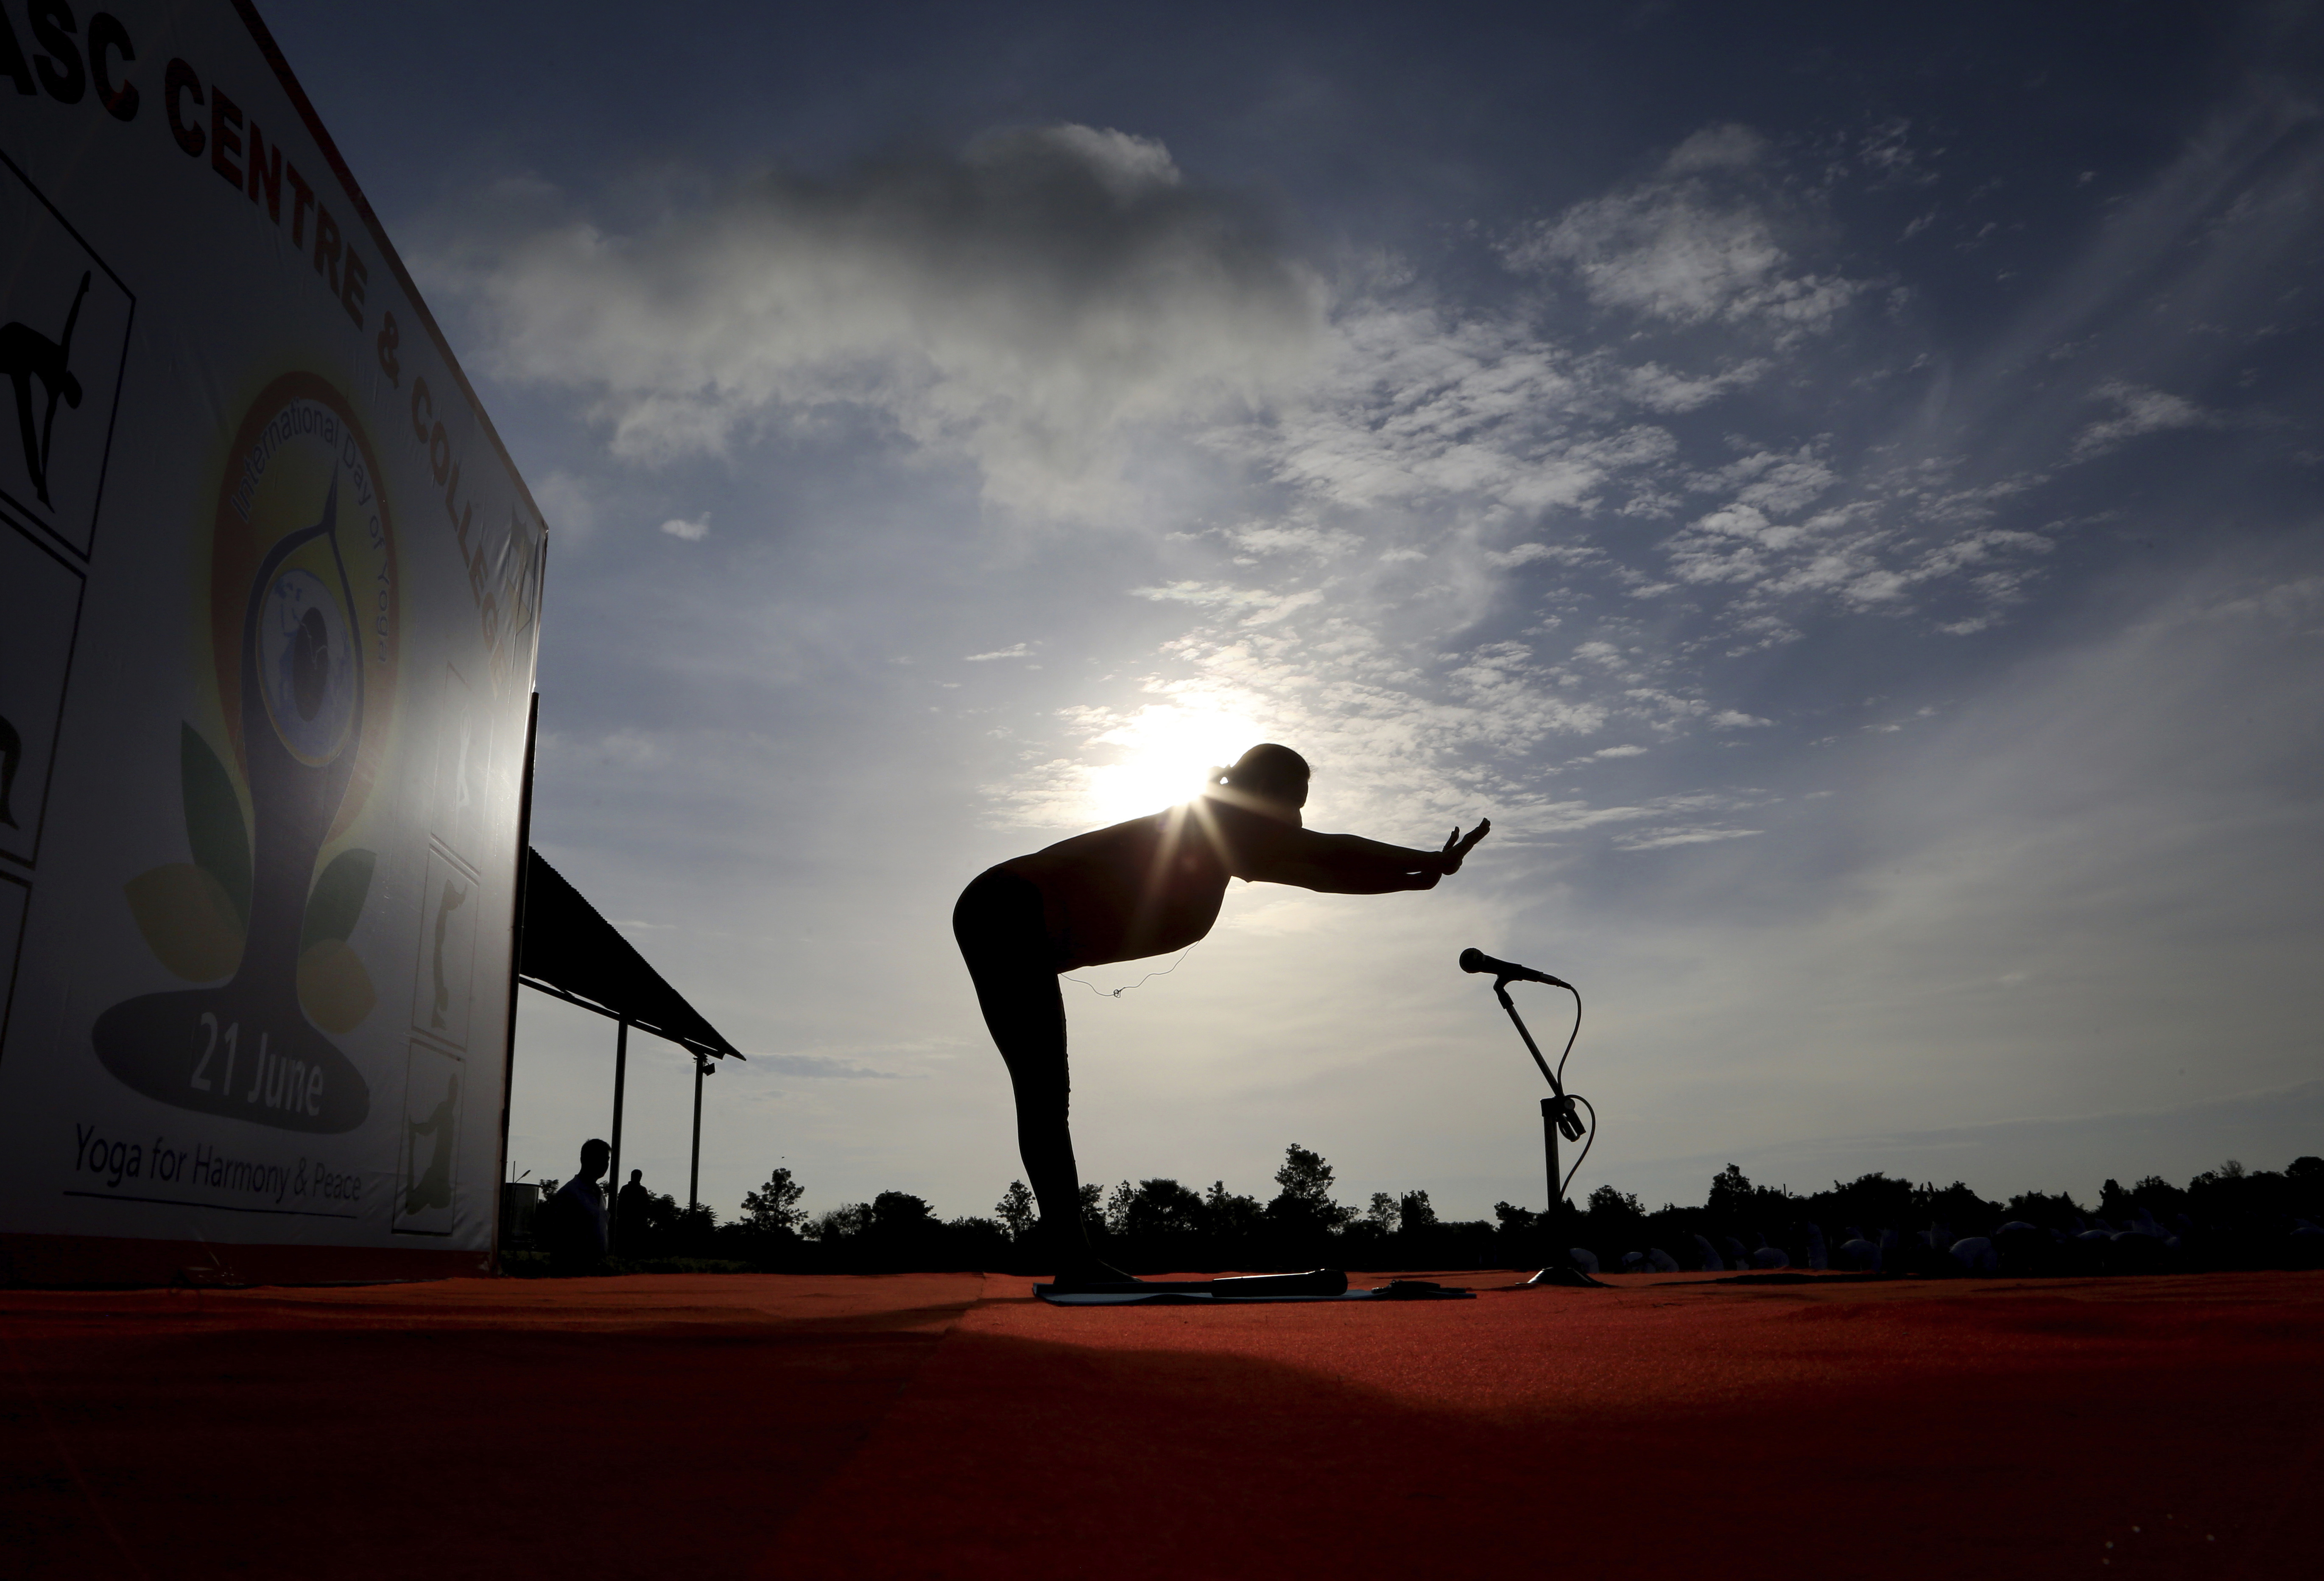 An Indian yoga instructor leads a large group of Indian army soldiers at a yoga session to mark International Yoga Day in Bangalore, India, Wednesday, June 21, 2017. Yoga practitioners took a relaxing break to bend, twist and pose Wednesday morning for the annual event celebrating the practice, especially in the country where it began. (AP Photo/Aijaz Rahi)